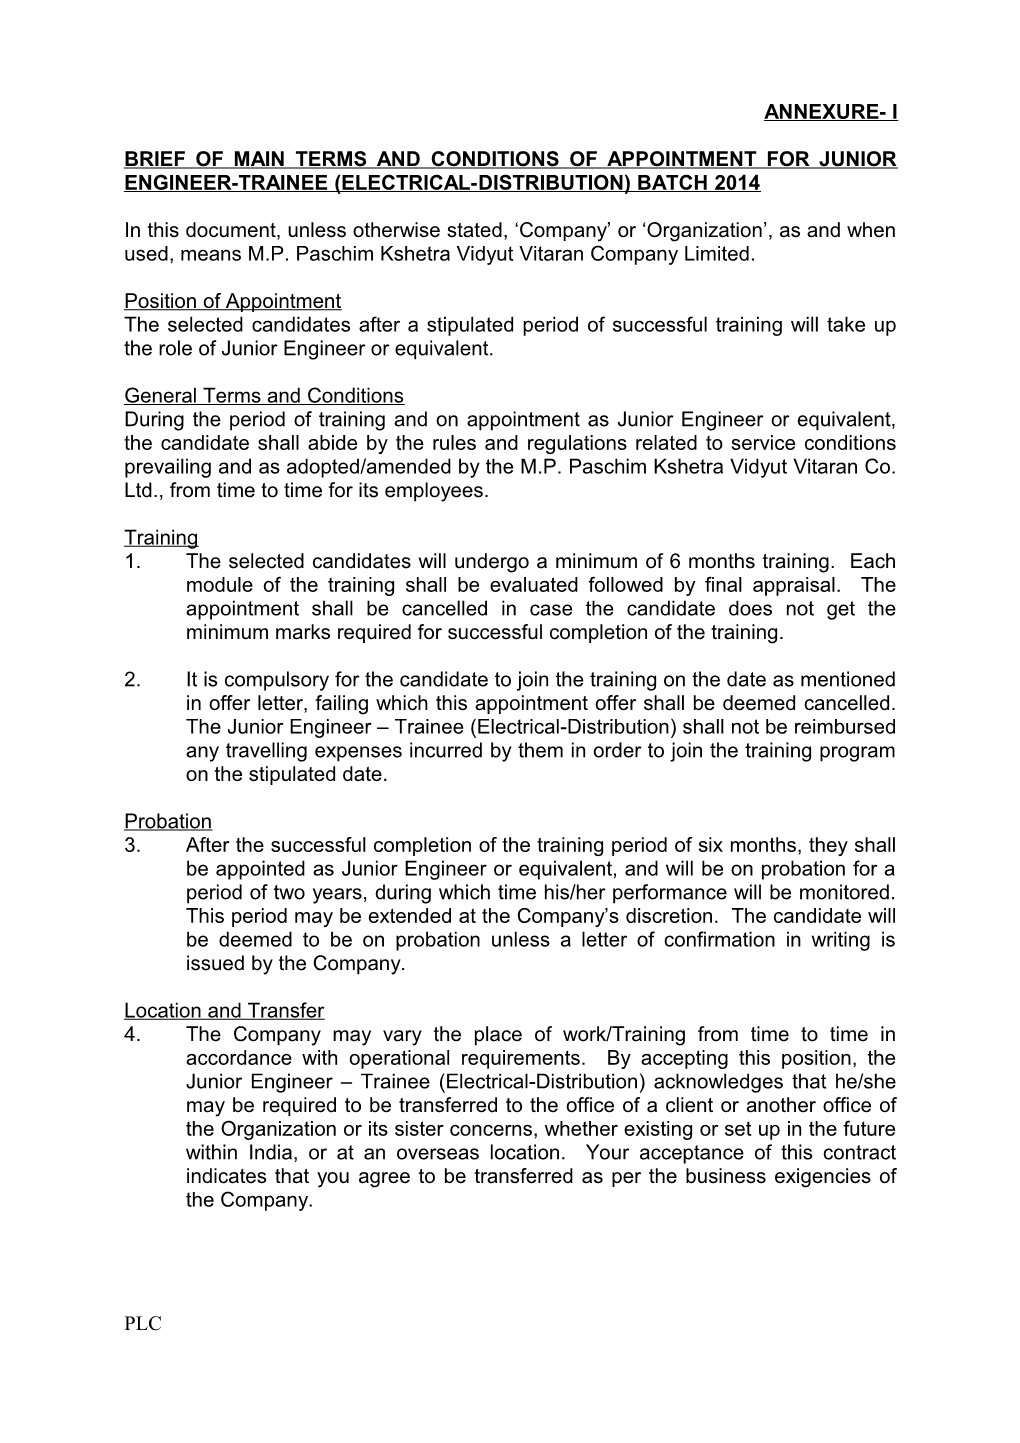 Brief of Main Terms and Conditions of Appointment for Junior Engineer-Trainee